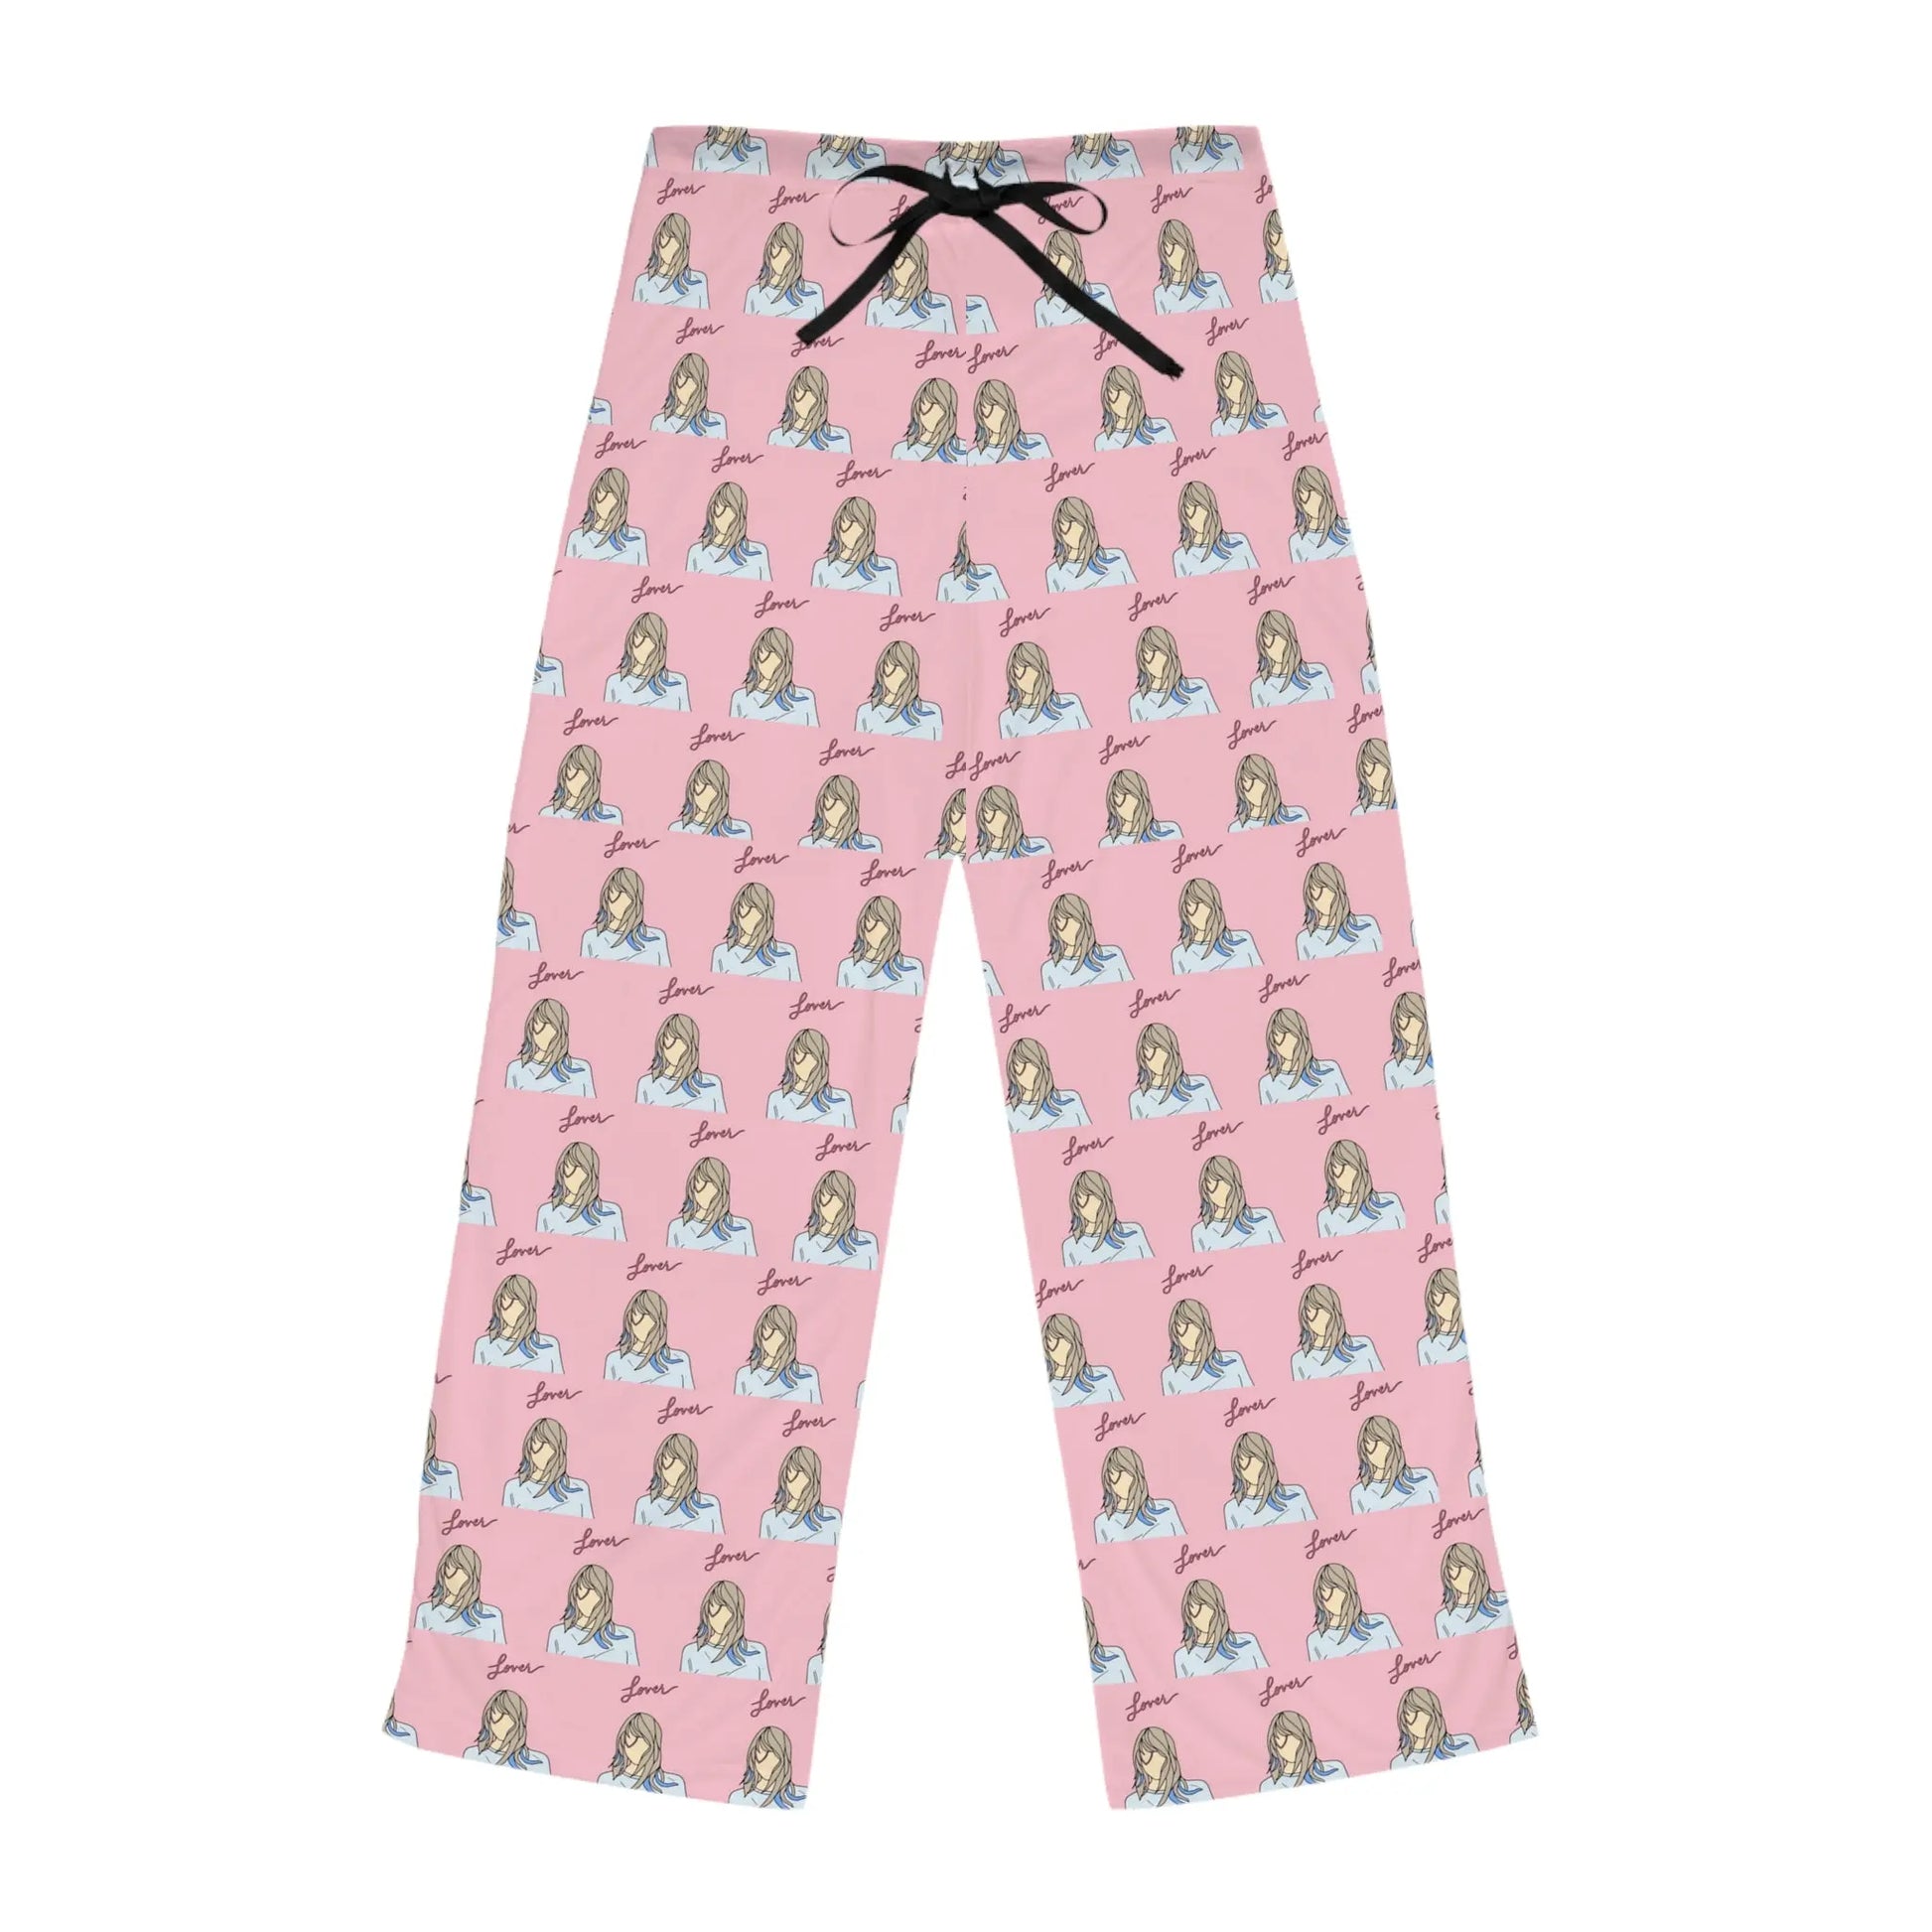 Lounge In Style With The Eras Era Drawstring Lounge Pants For